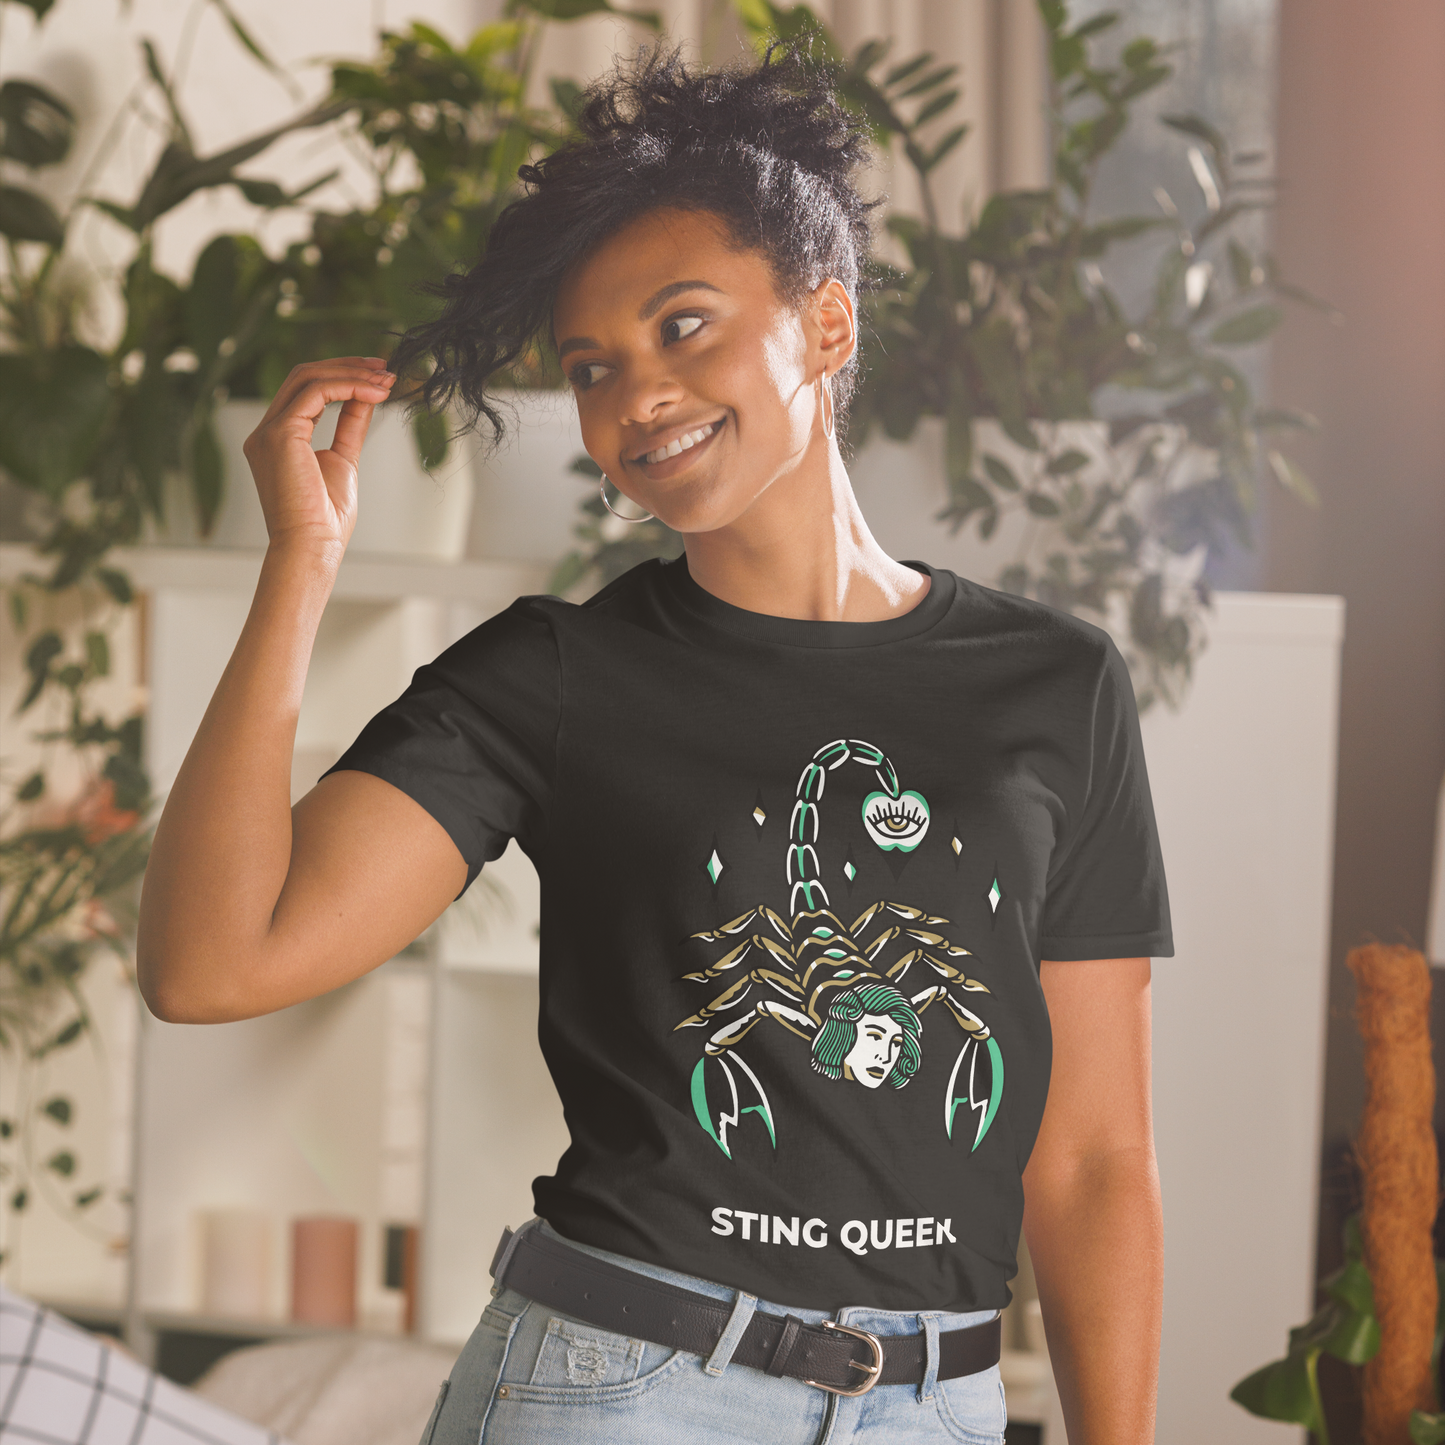 Smiling woman wearing a Black Scorpion T-Shirt featuring the Sting Queen graphic on the chest - Cool Graphic Scorpion T-Shirts - Boozy Fox